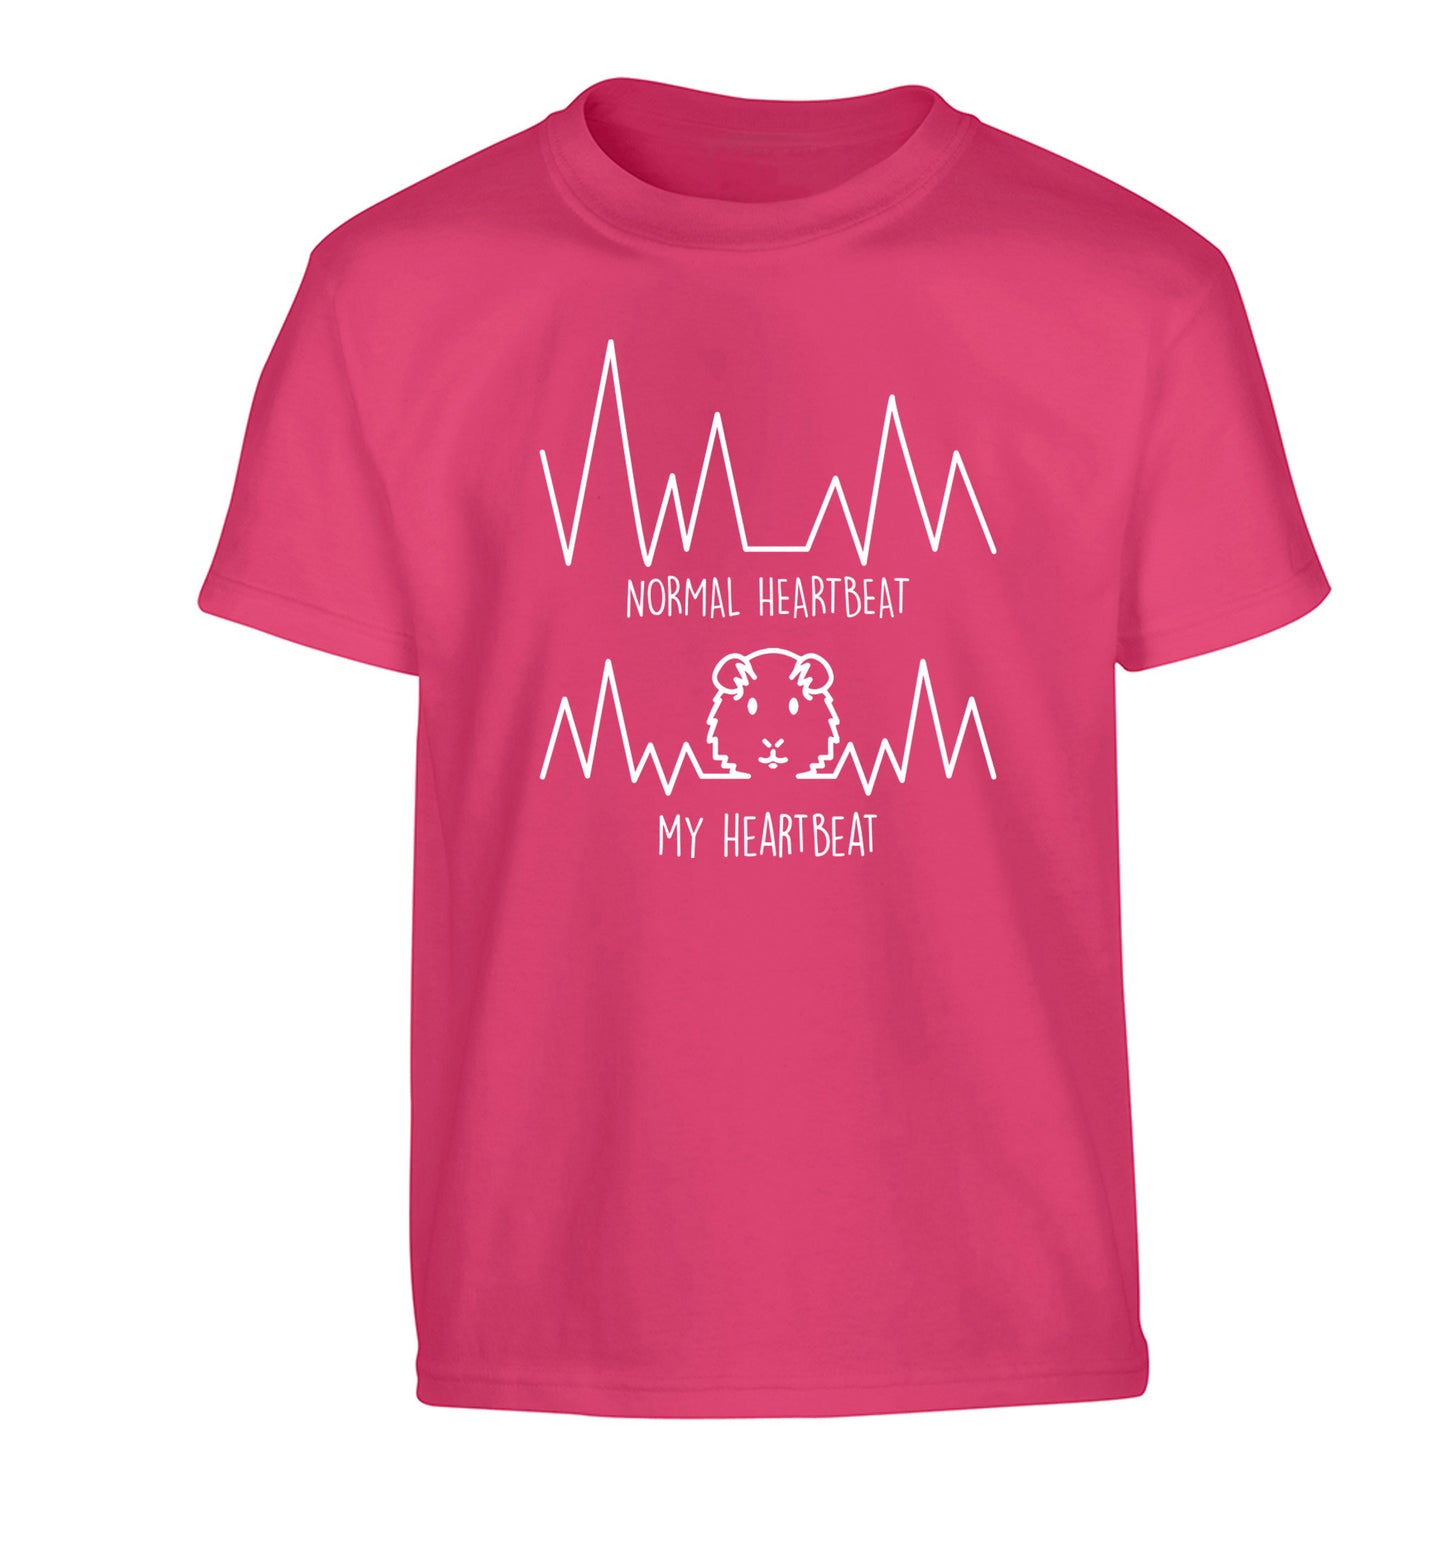 Normal heartbeat vs my heartbeat guinea pig lover Children's pink Tshirt 12-14 Years